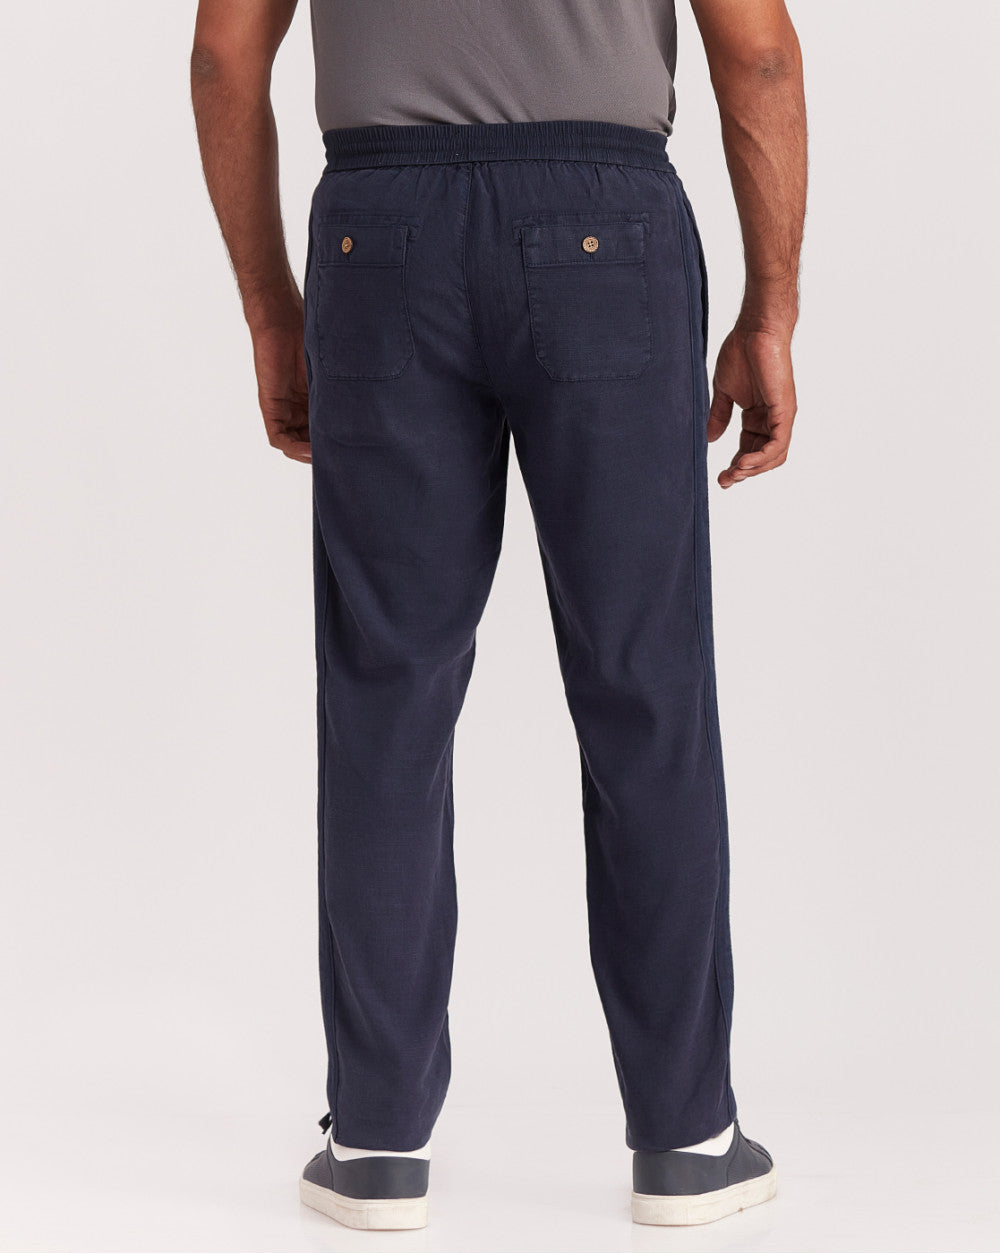 Tapered Fit Comfort Pants - Navy